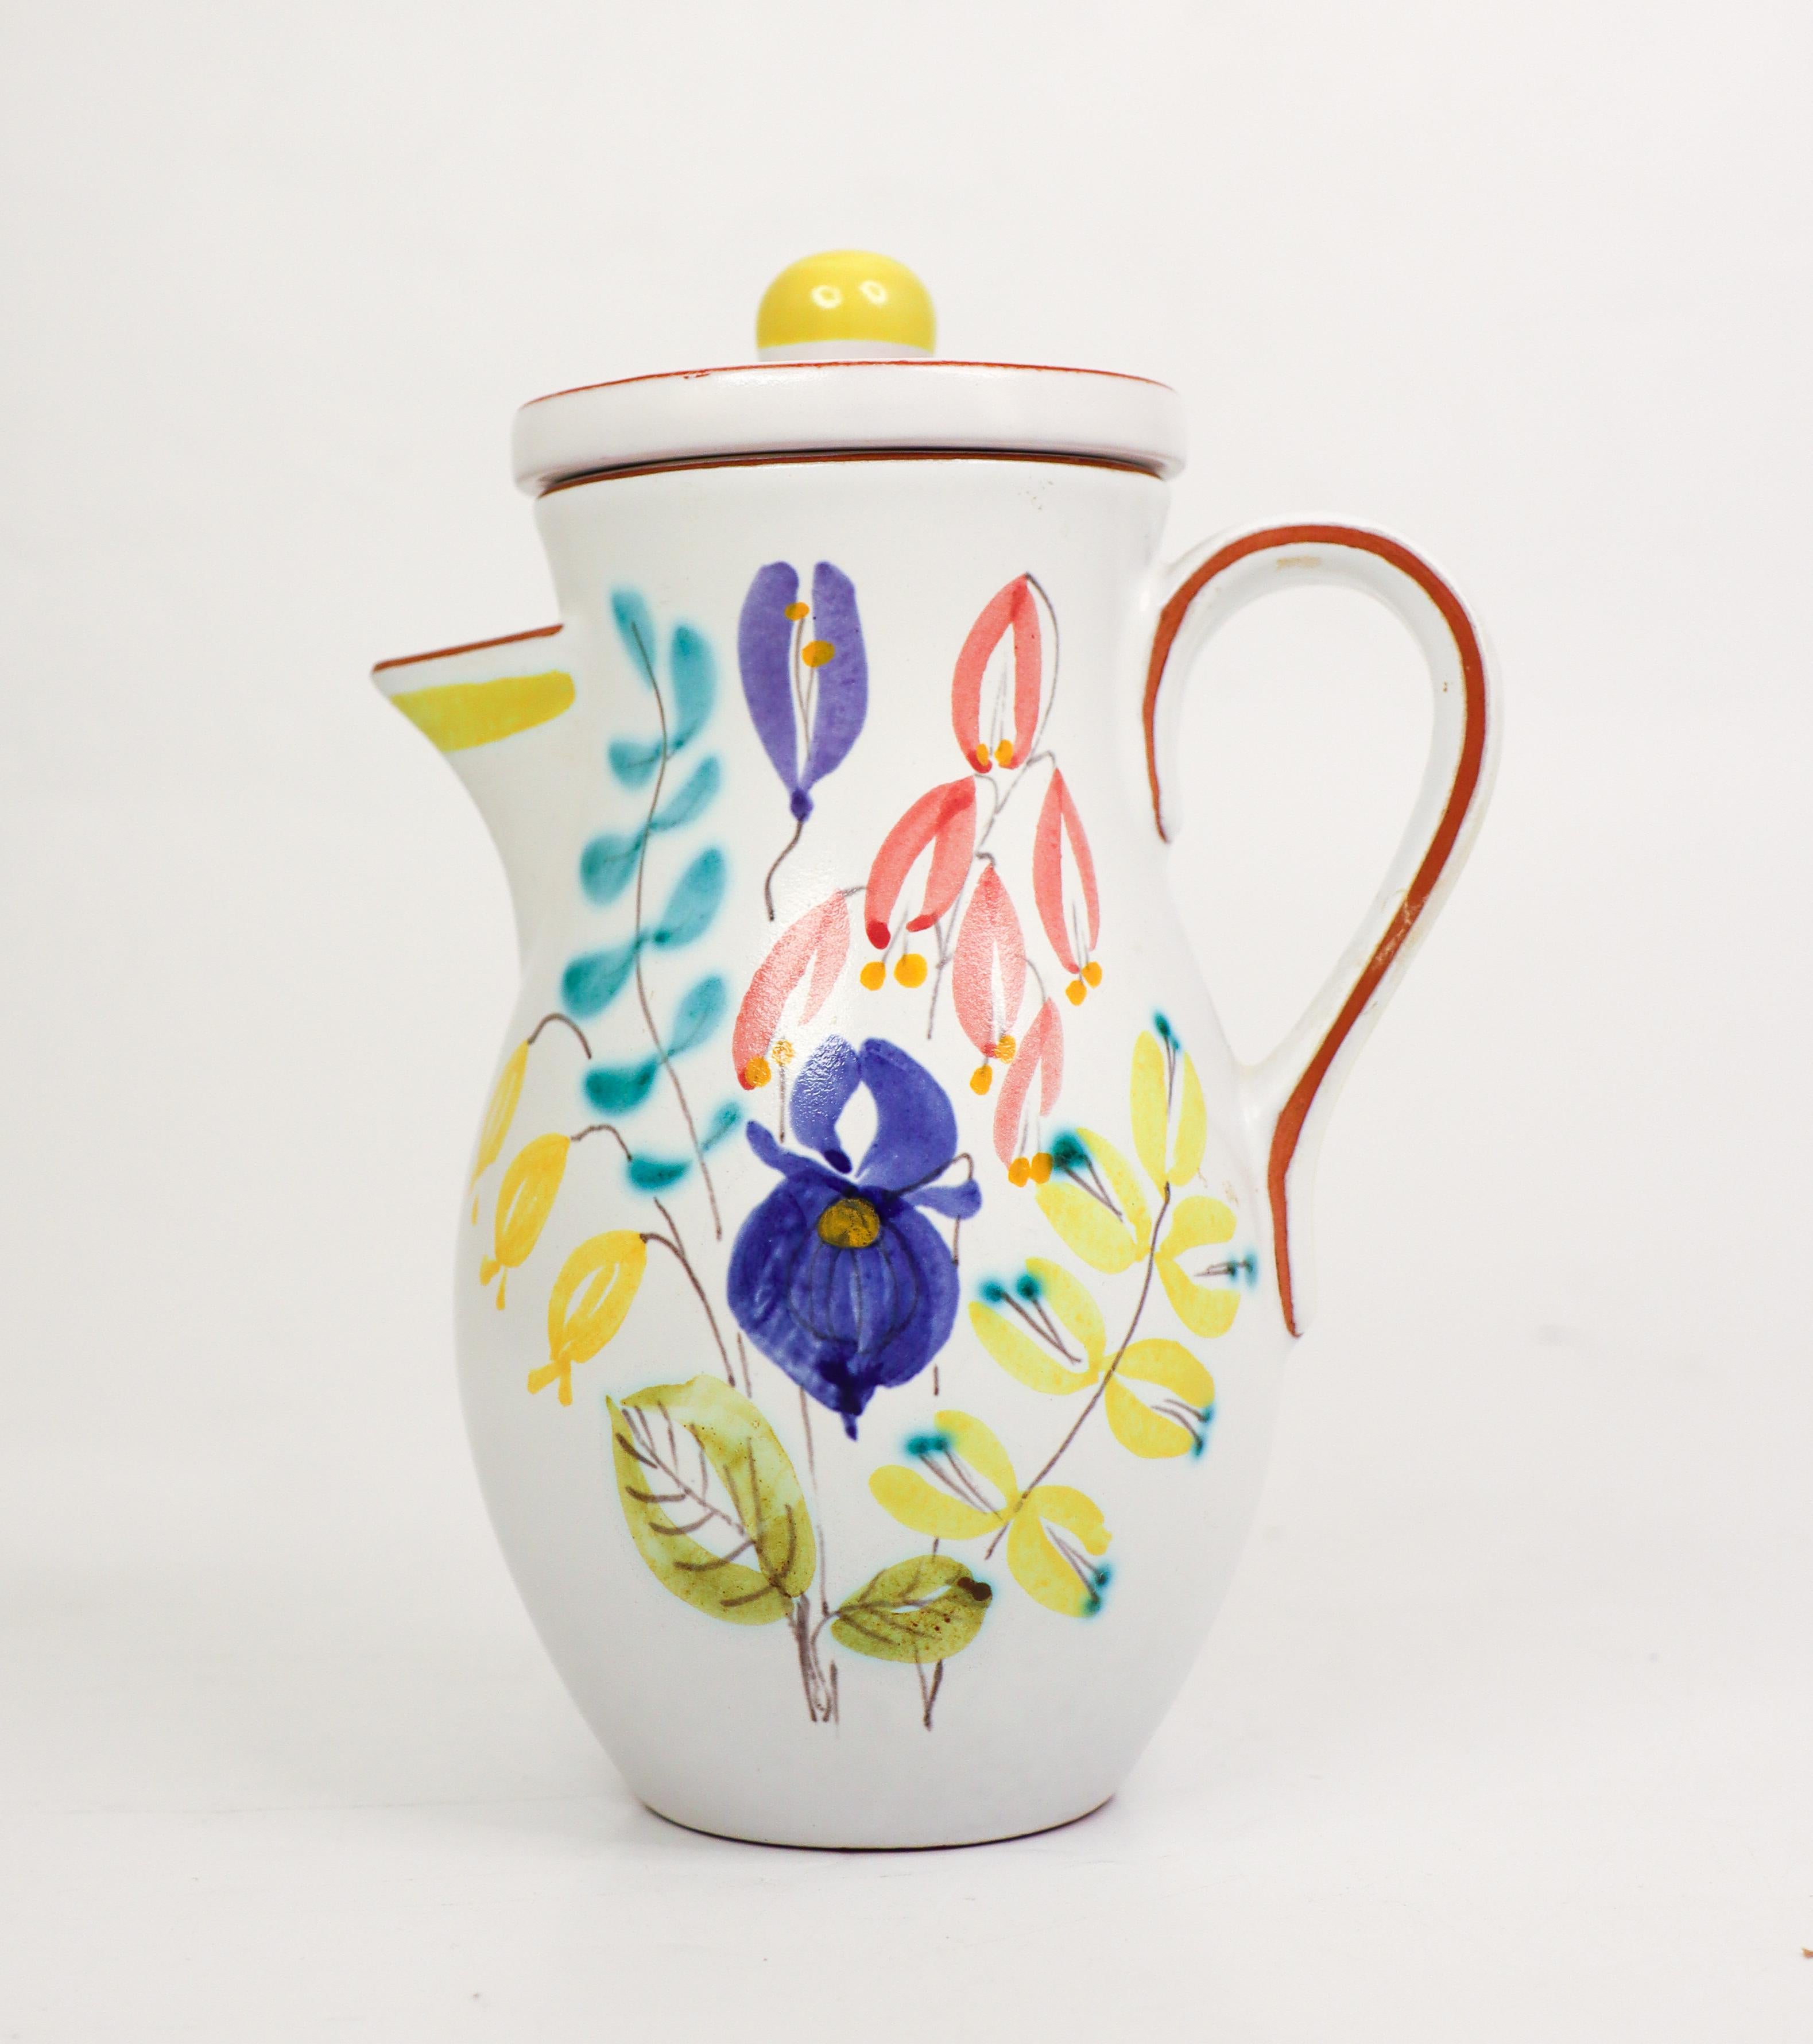 Faience Jug - Stig Lindberg - Gustavsbergs Studio - 1950s In Excellent Condition For Sale In Stockholm, SE